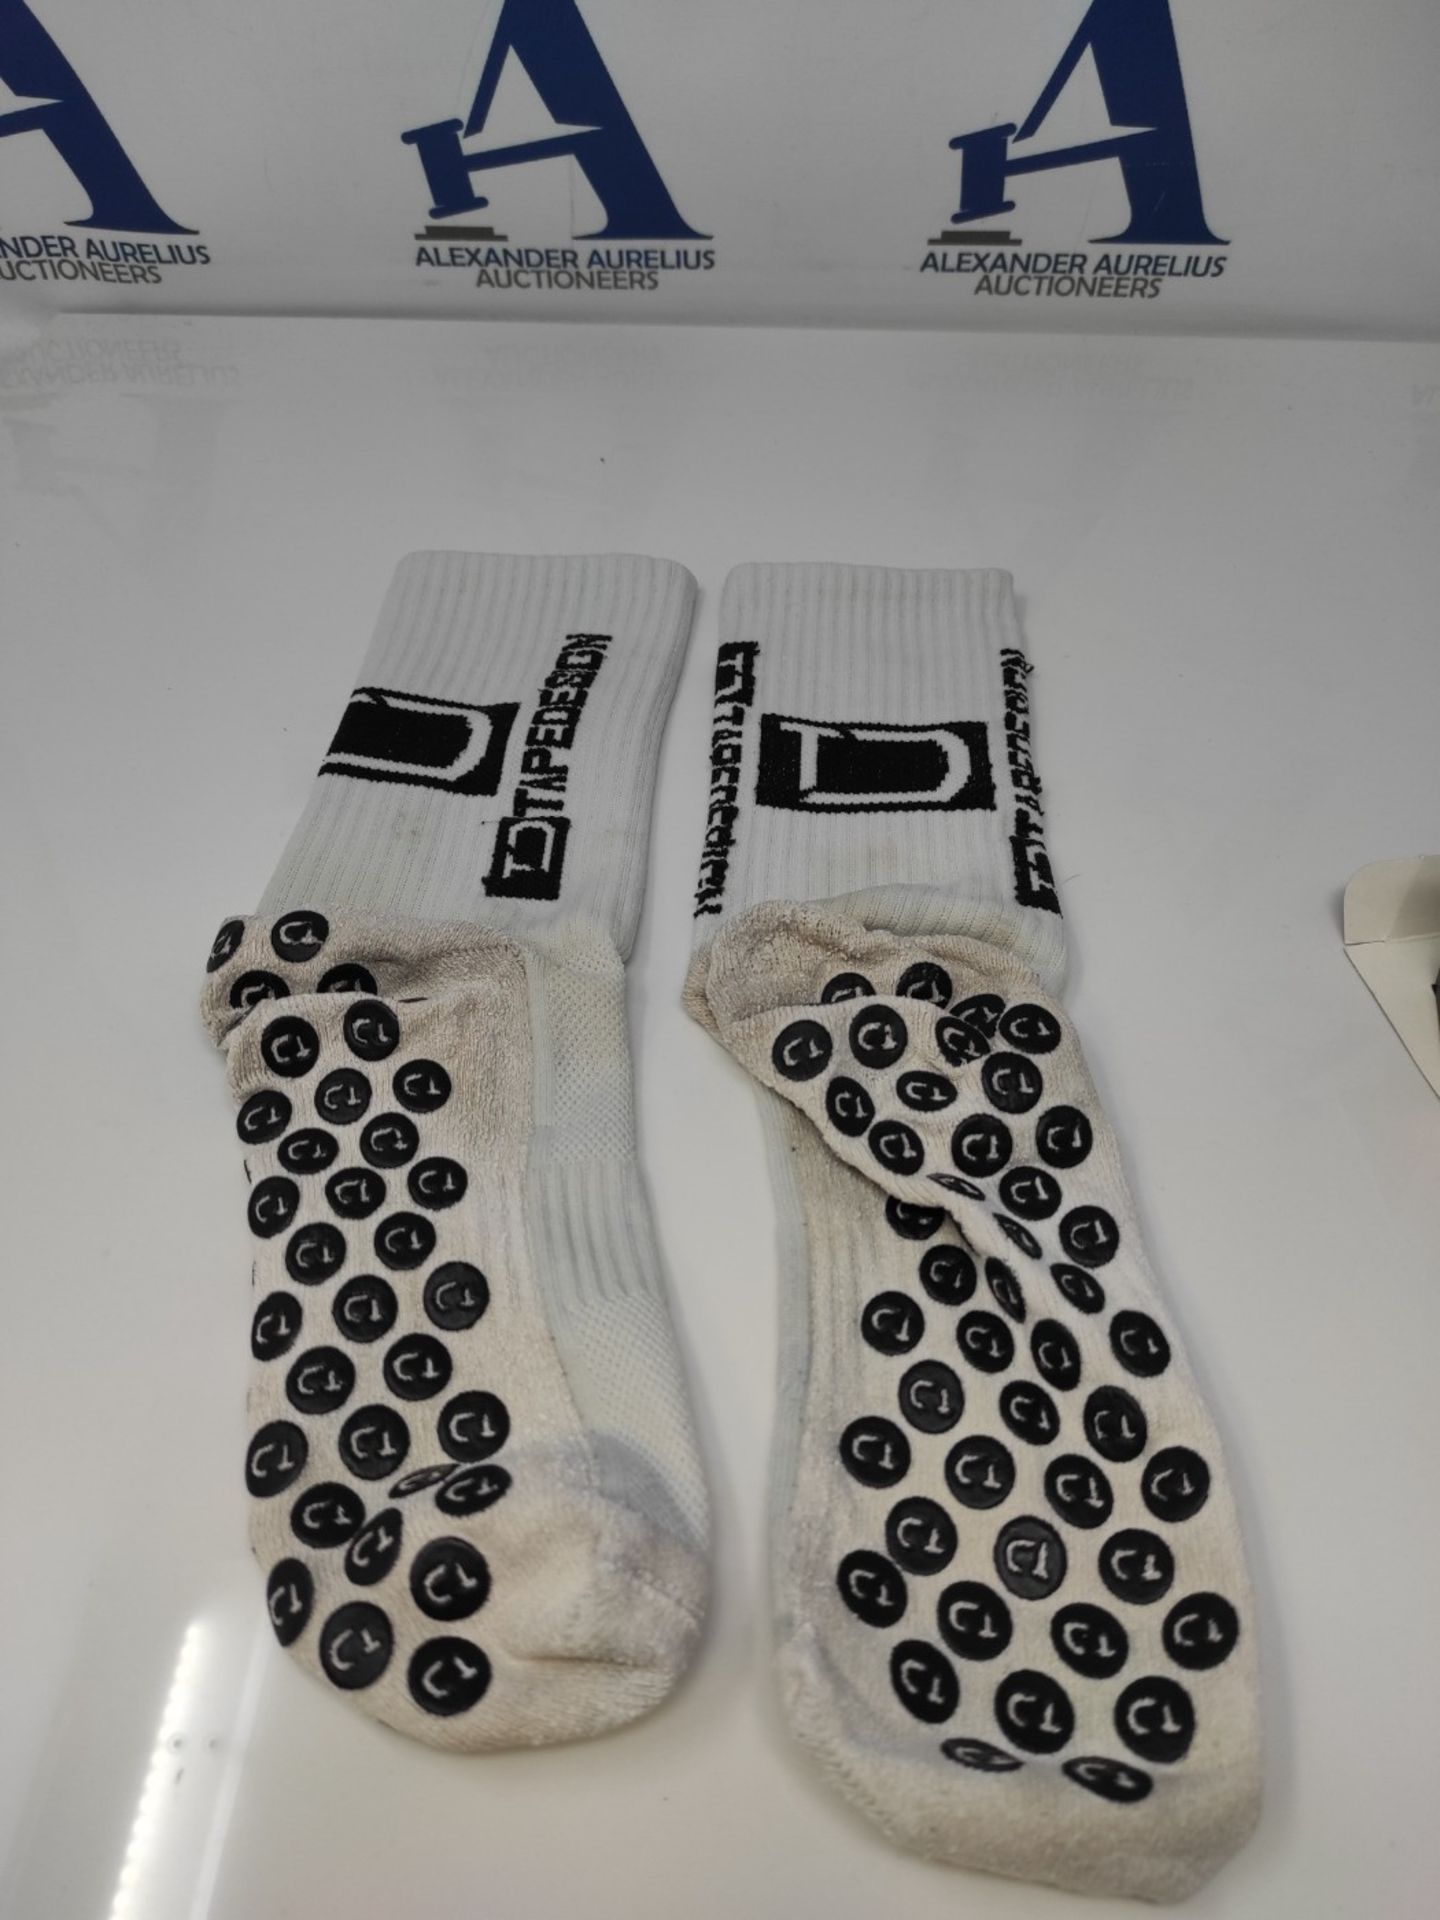 TAPEDESIGN "Classic" - 1 Pair of Non-Slip Soccer Socks with Rubberized Nubs (Unisex) - - Image 3 of 3